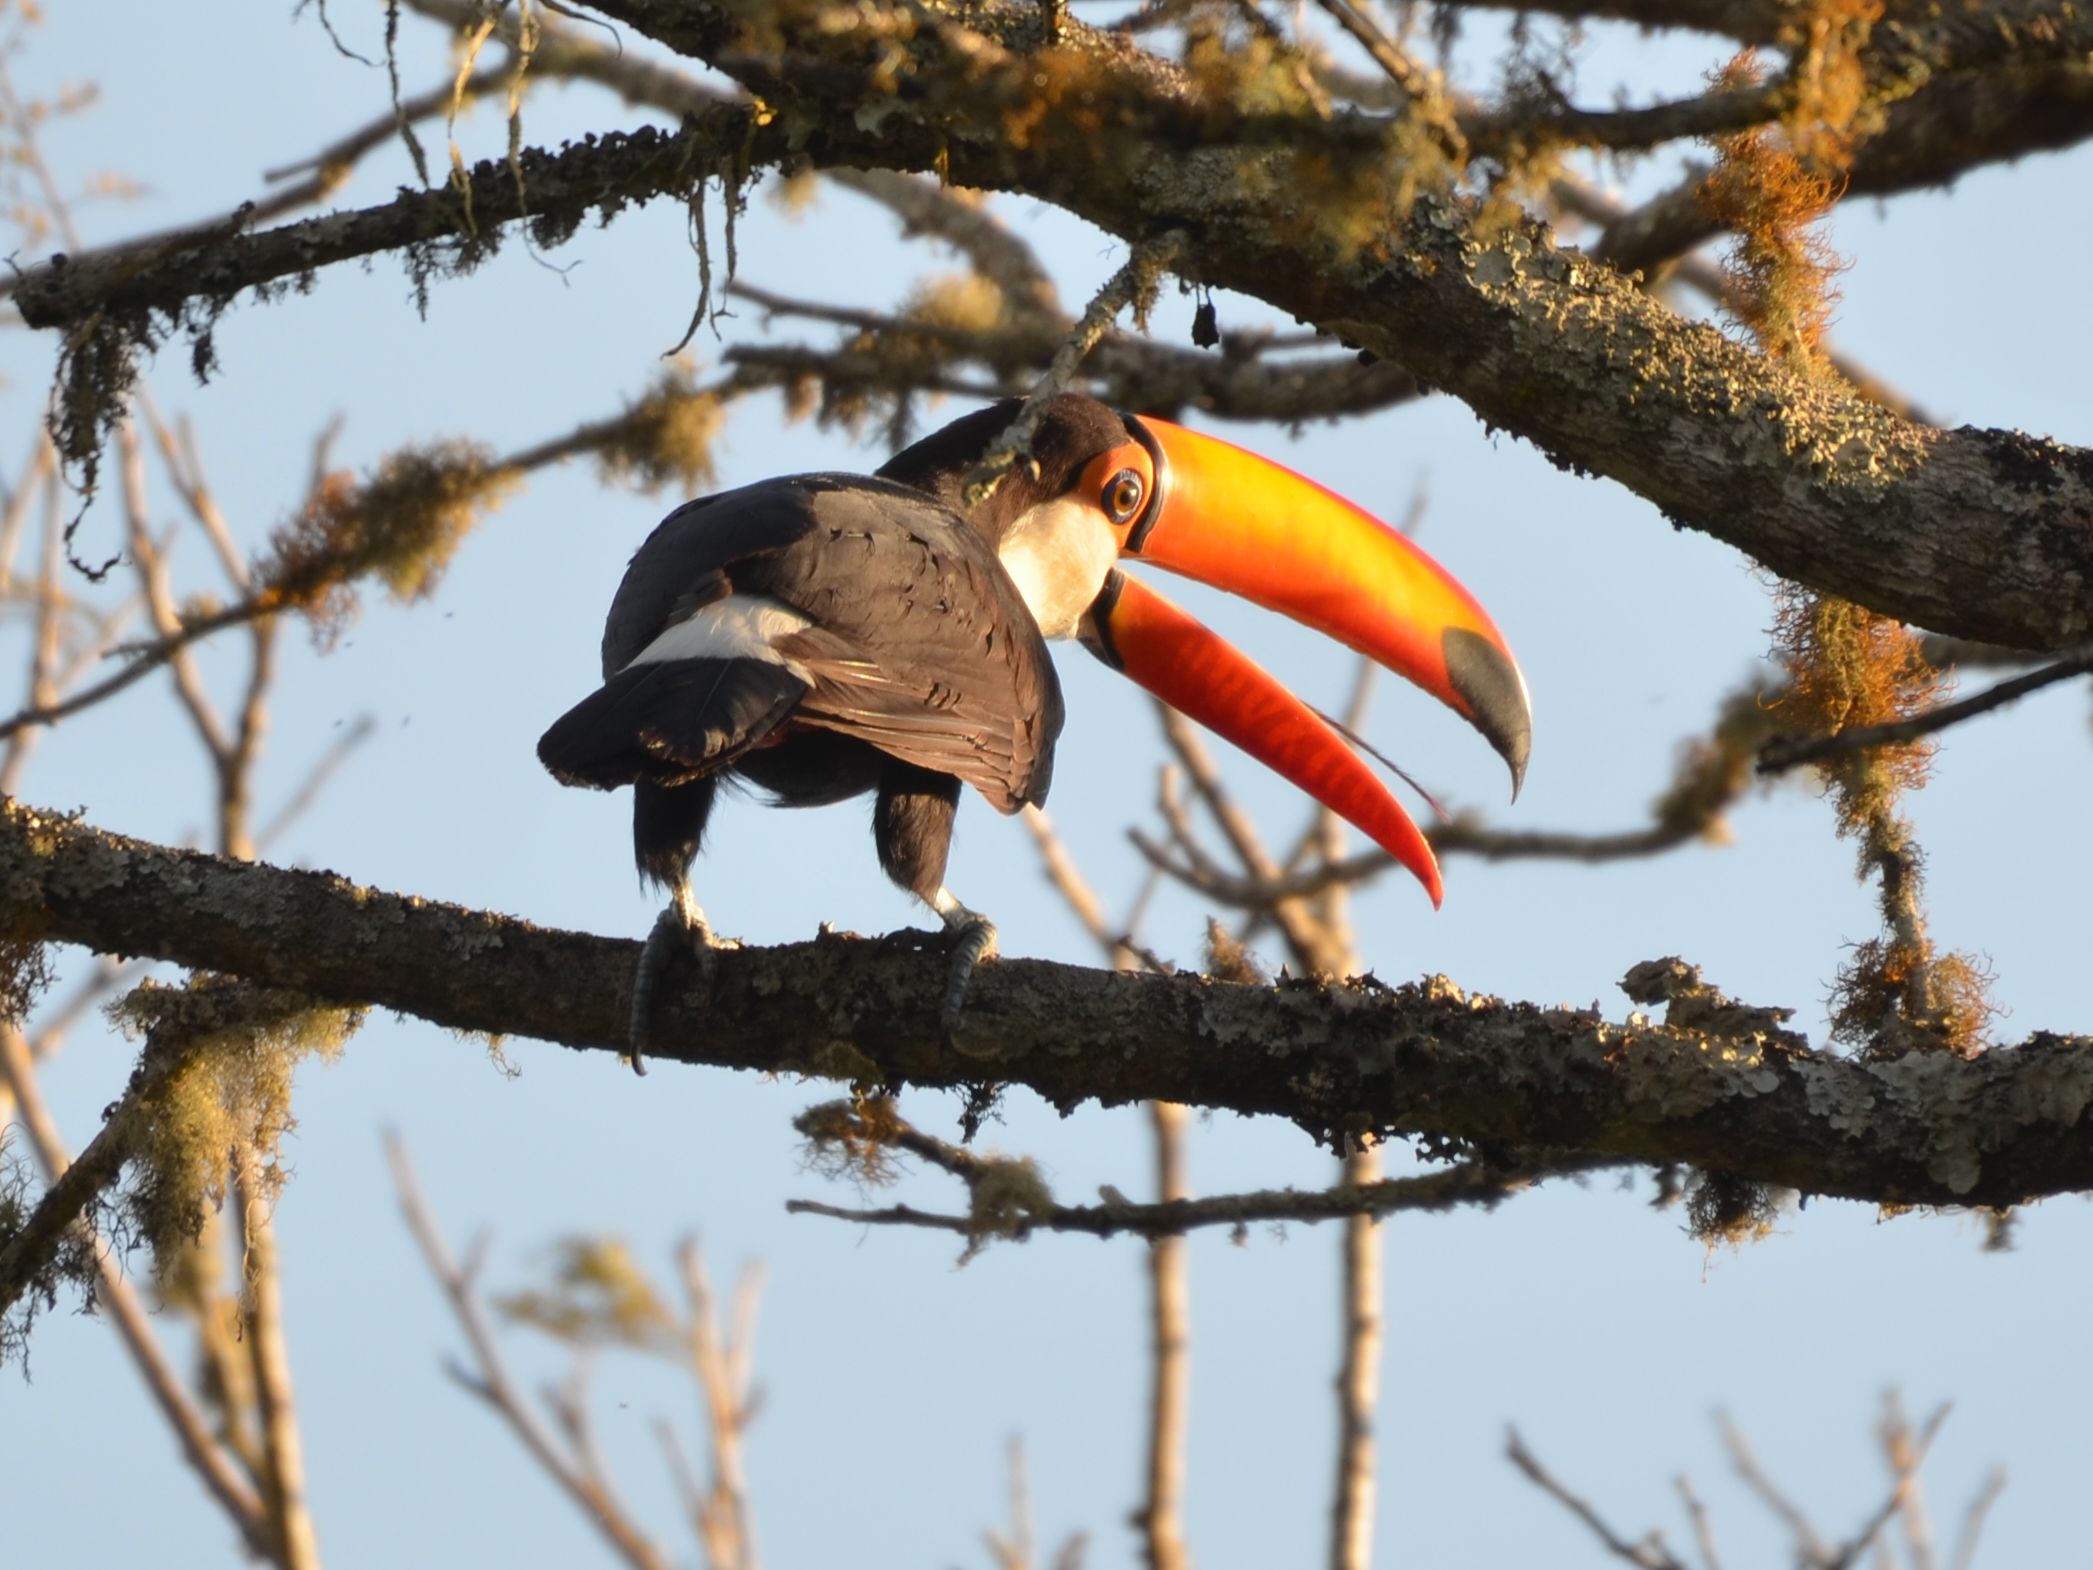 Click picture to see more Toco Toucans.